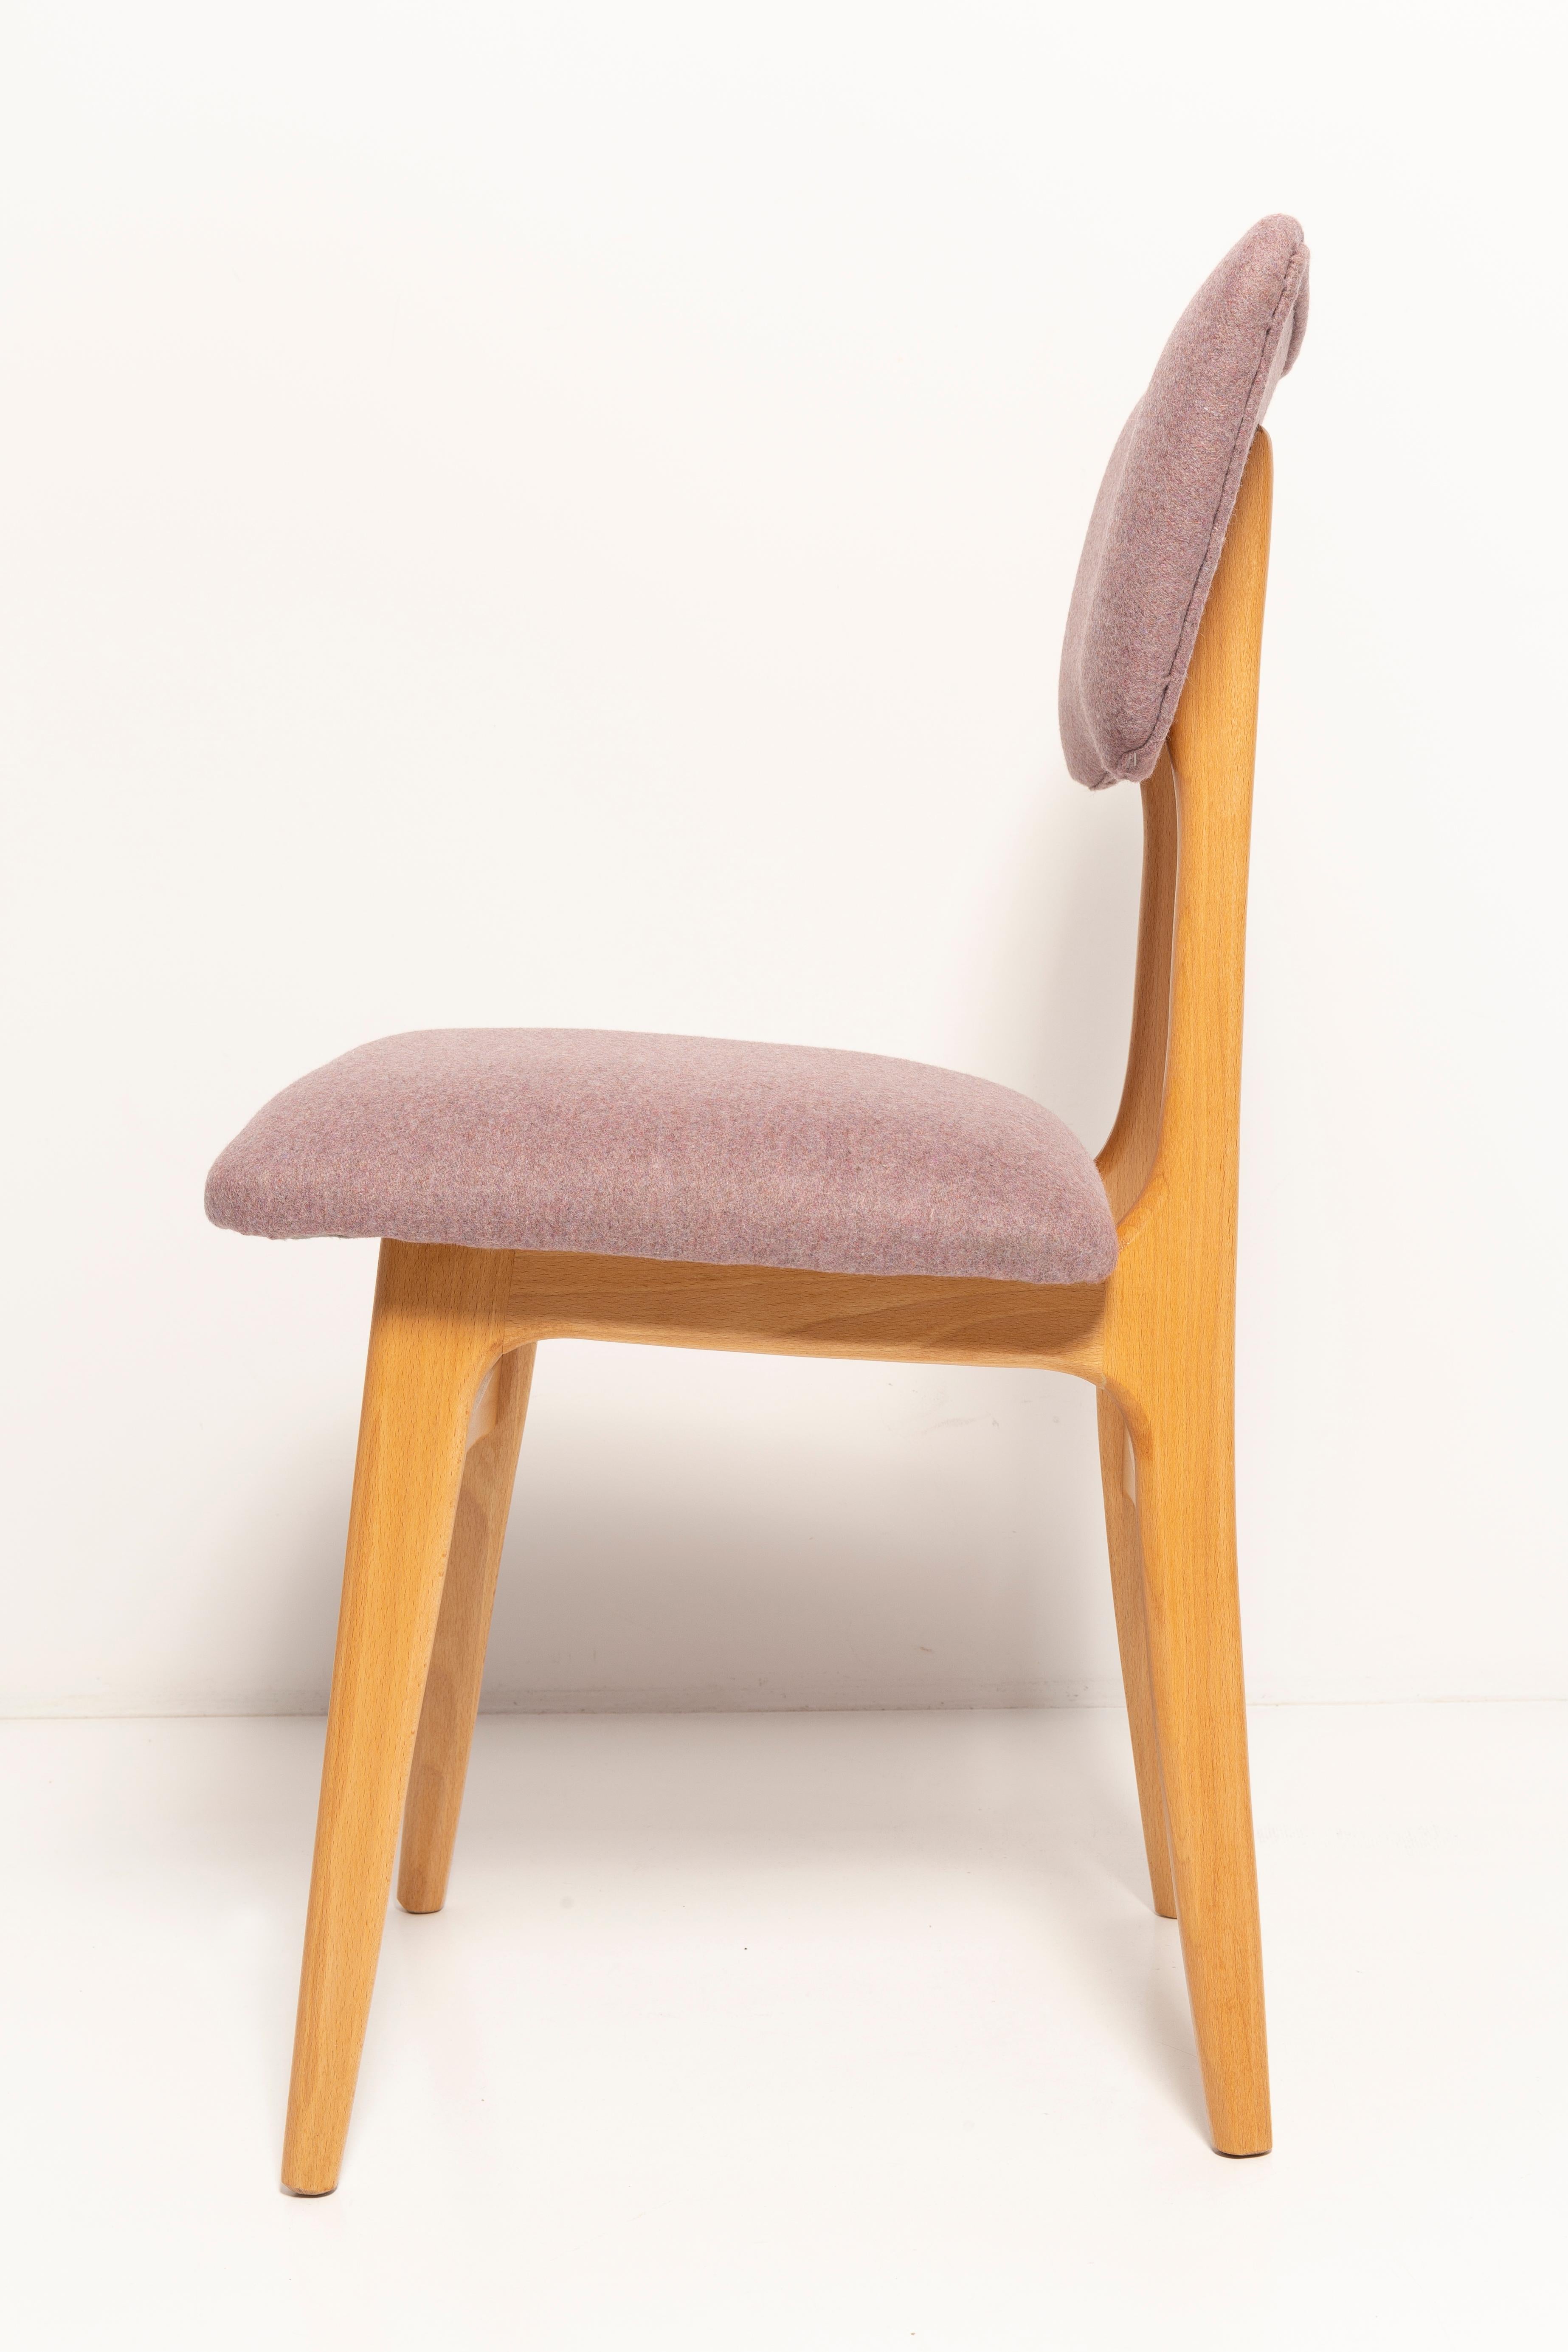 Nine 20th Century Butterfly Dining Chairs, Pink Wool, Light Wood, Europe, 1960s For Sale 4